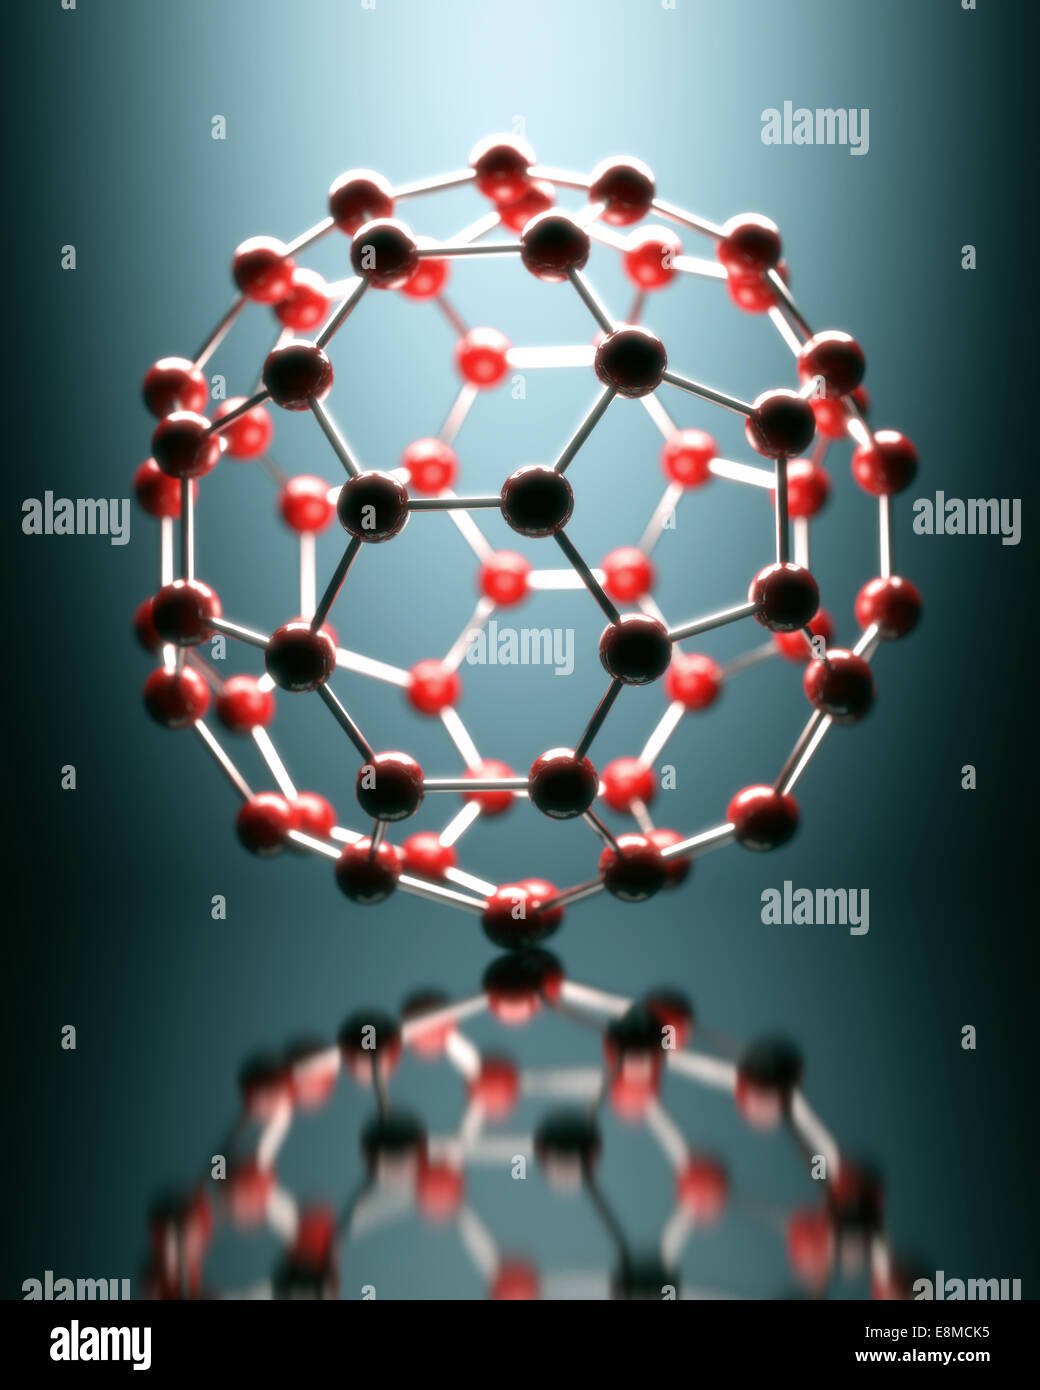 Molecular structure floating on reflective surface. Stock Photo